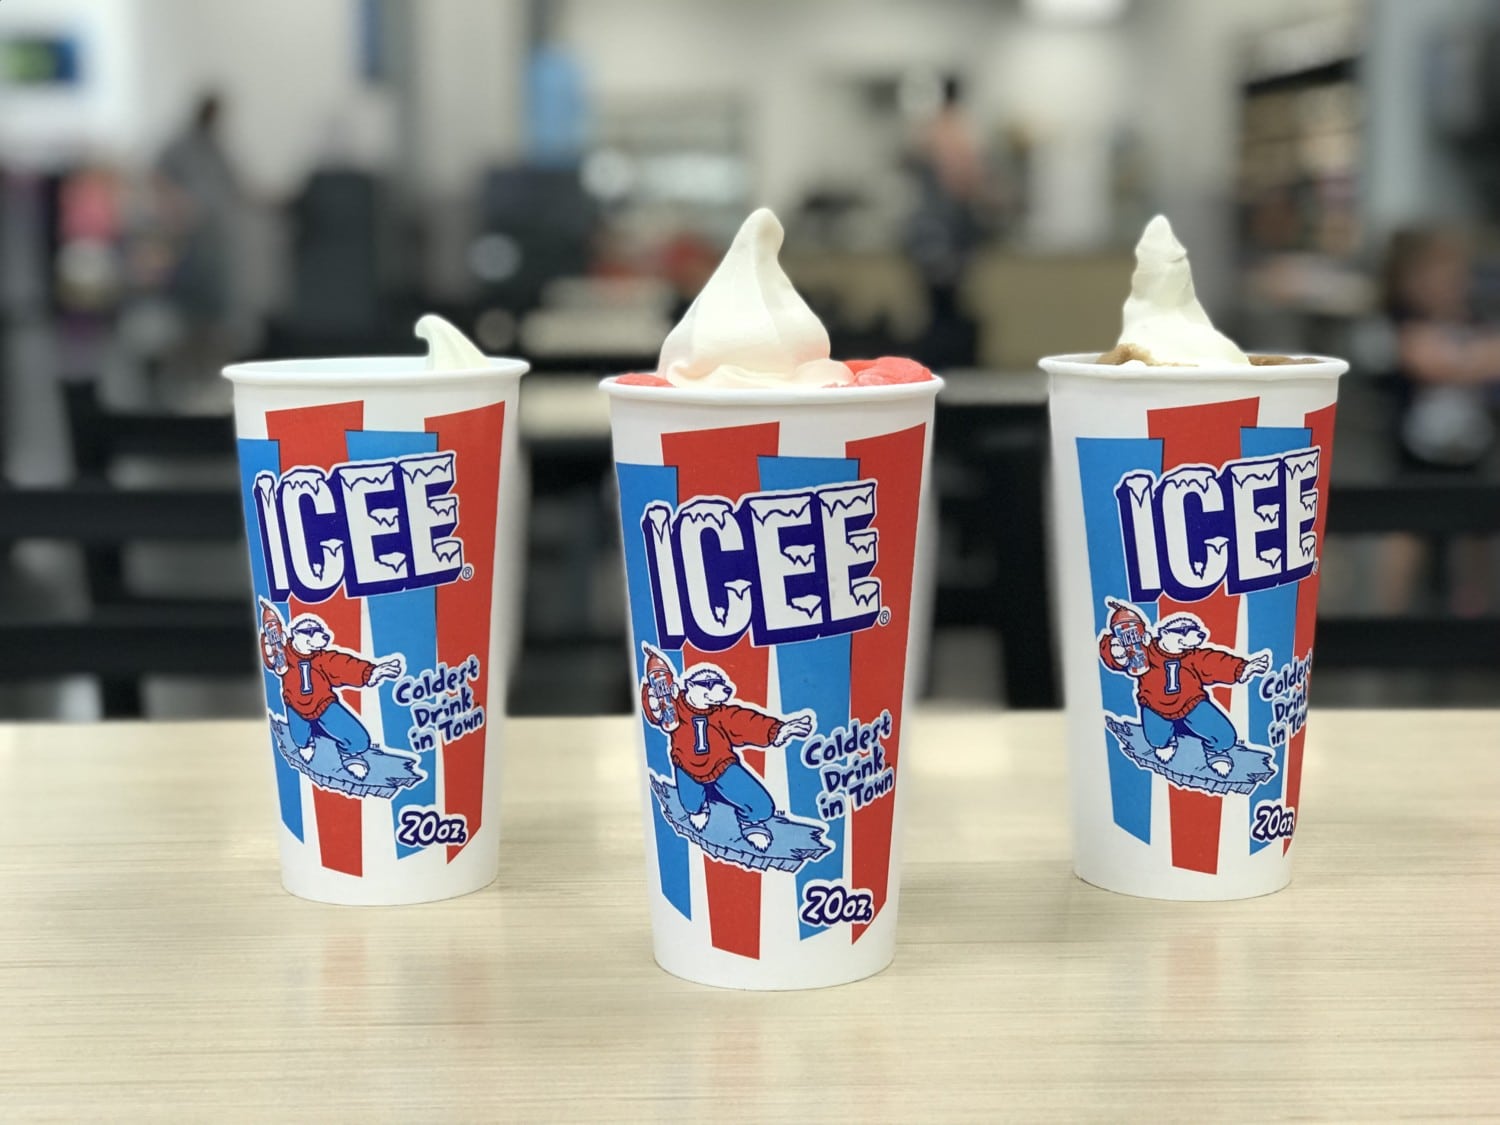 Ends today! Get a free Icee Float sample at Sam’s Club